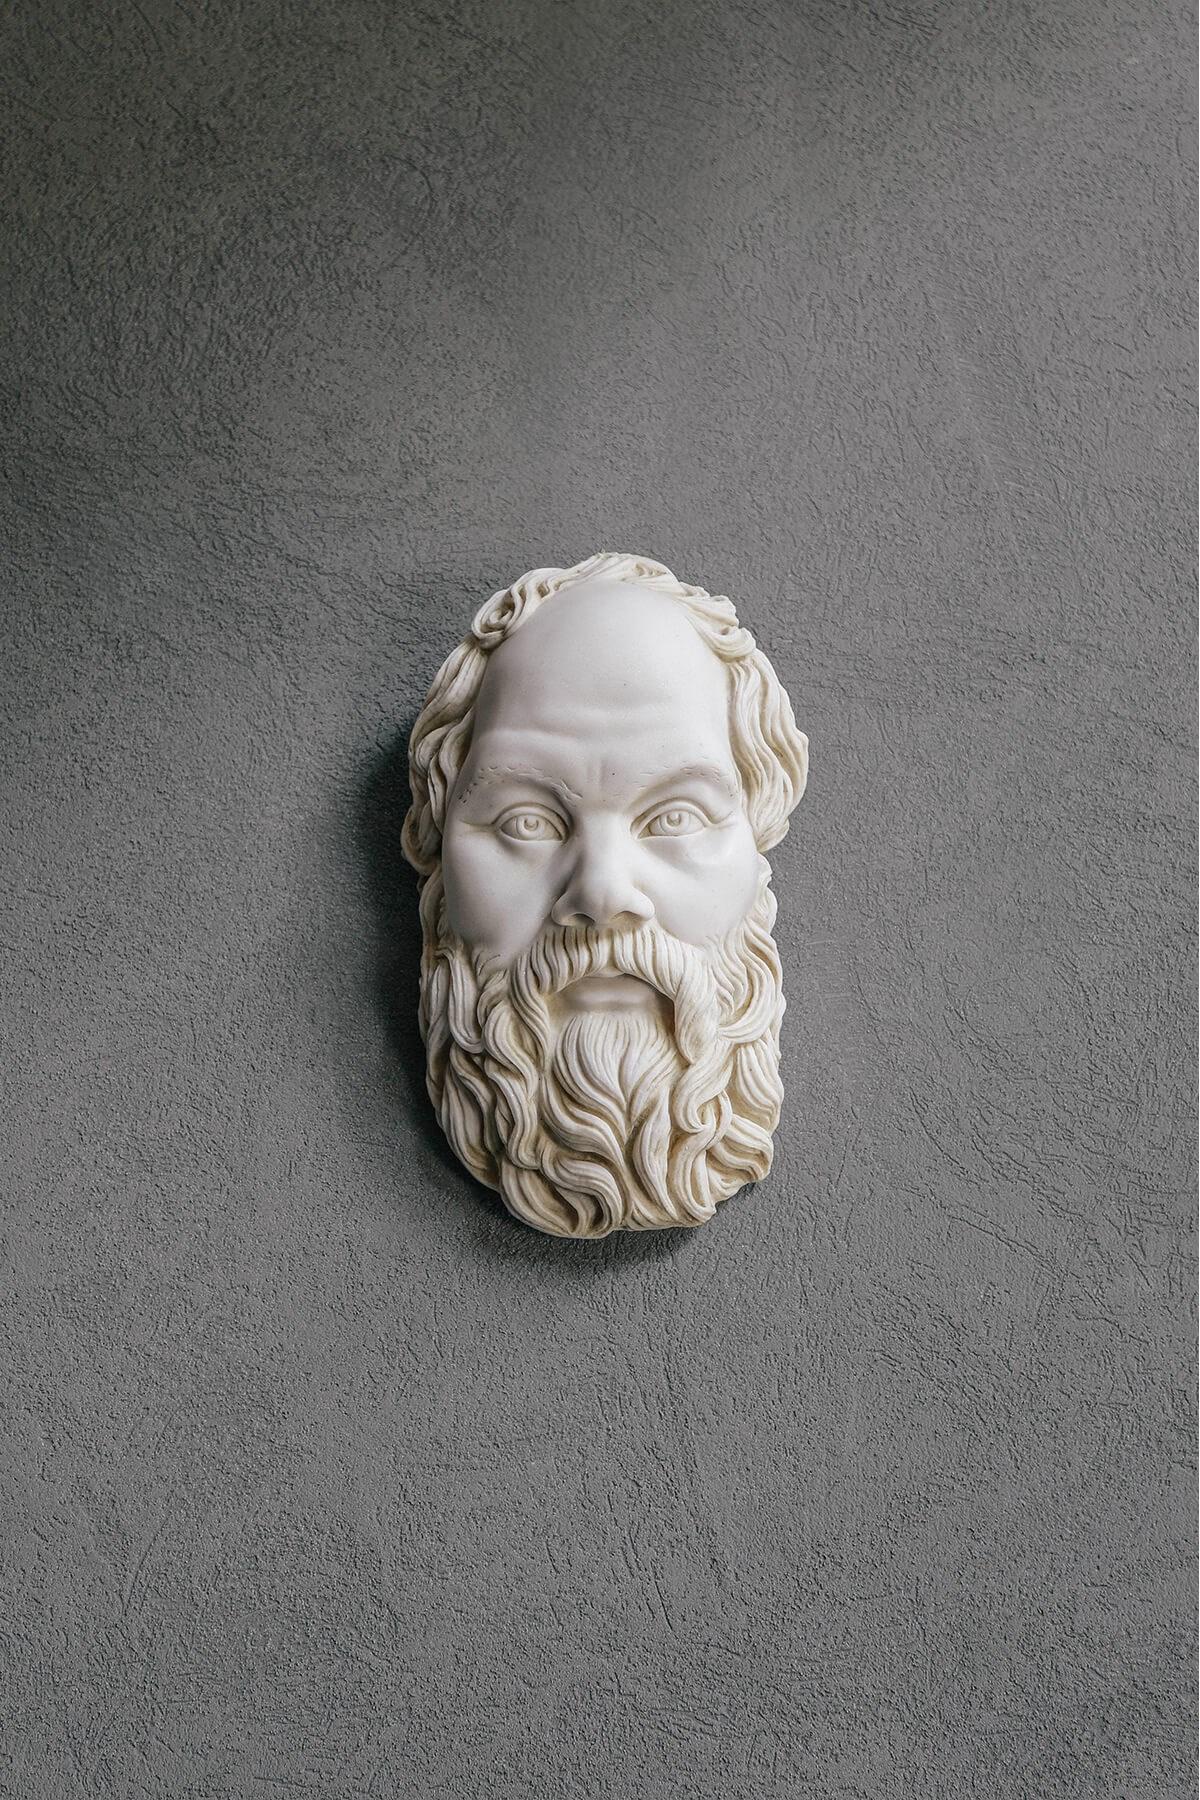 Cast Socrates Mask Made with Compressed Marble Powder 'Ephesus Museum'